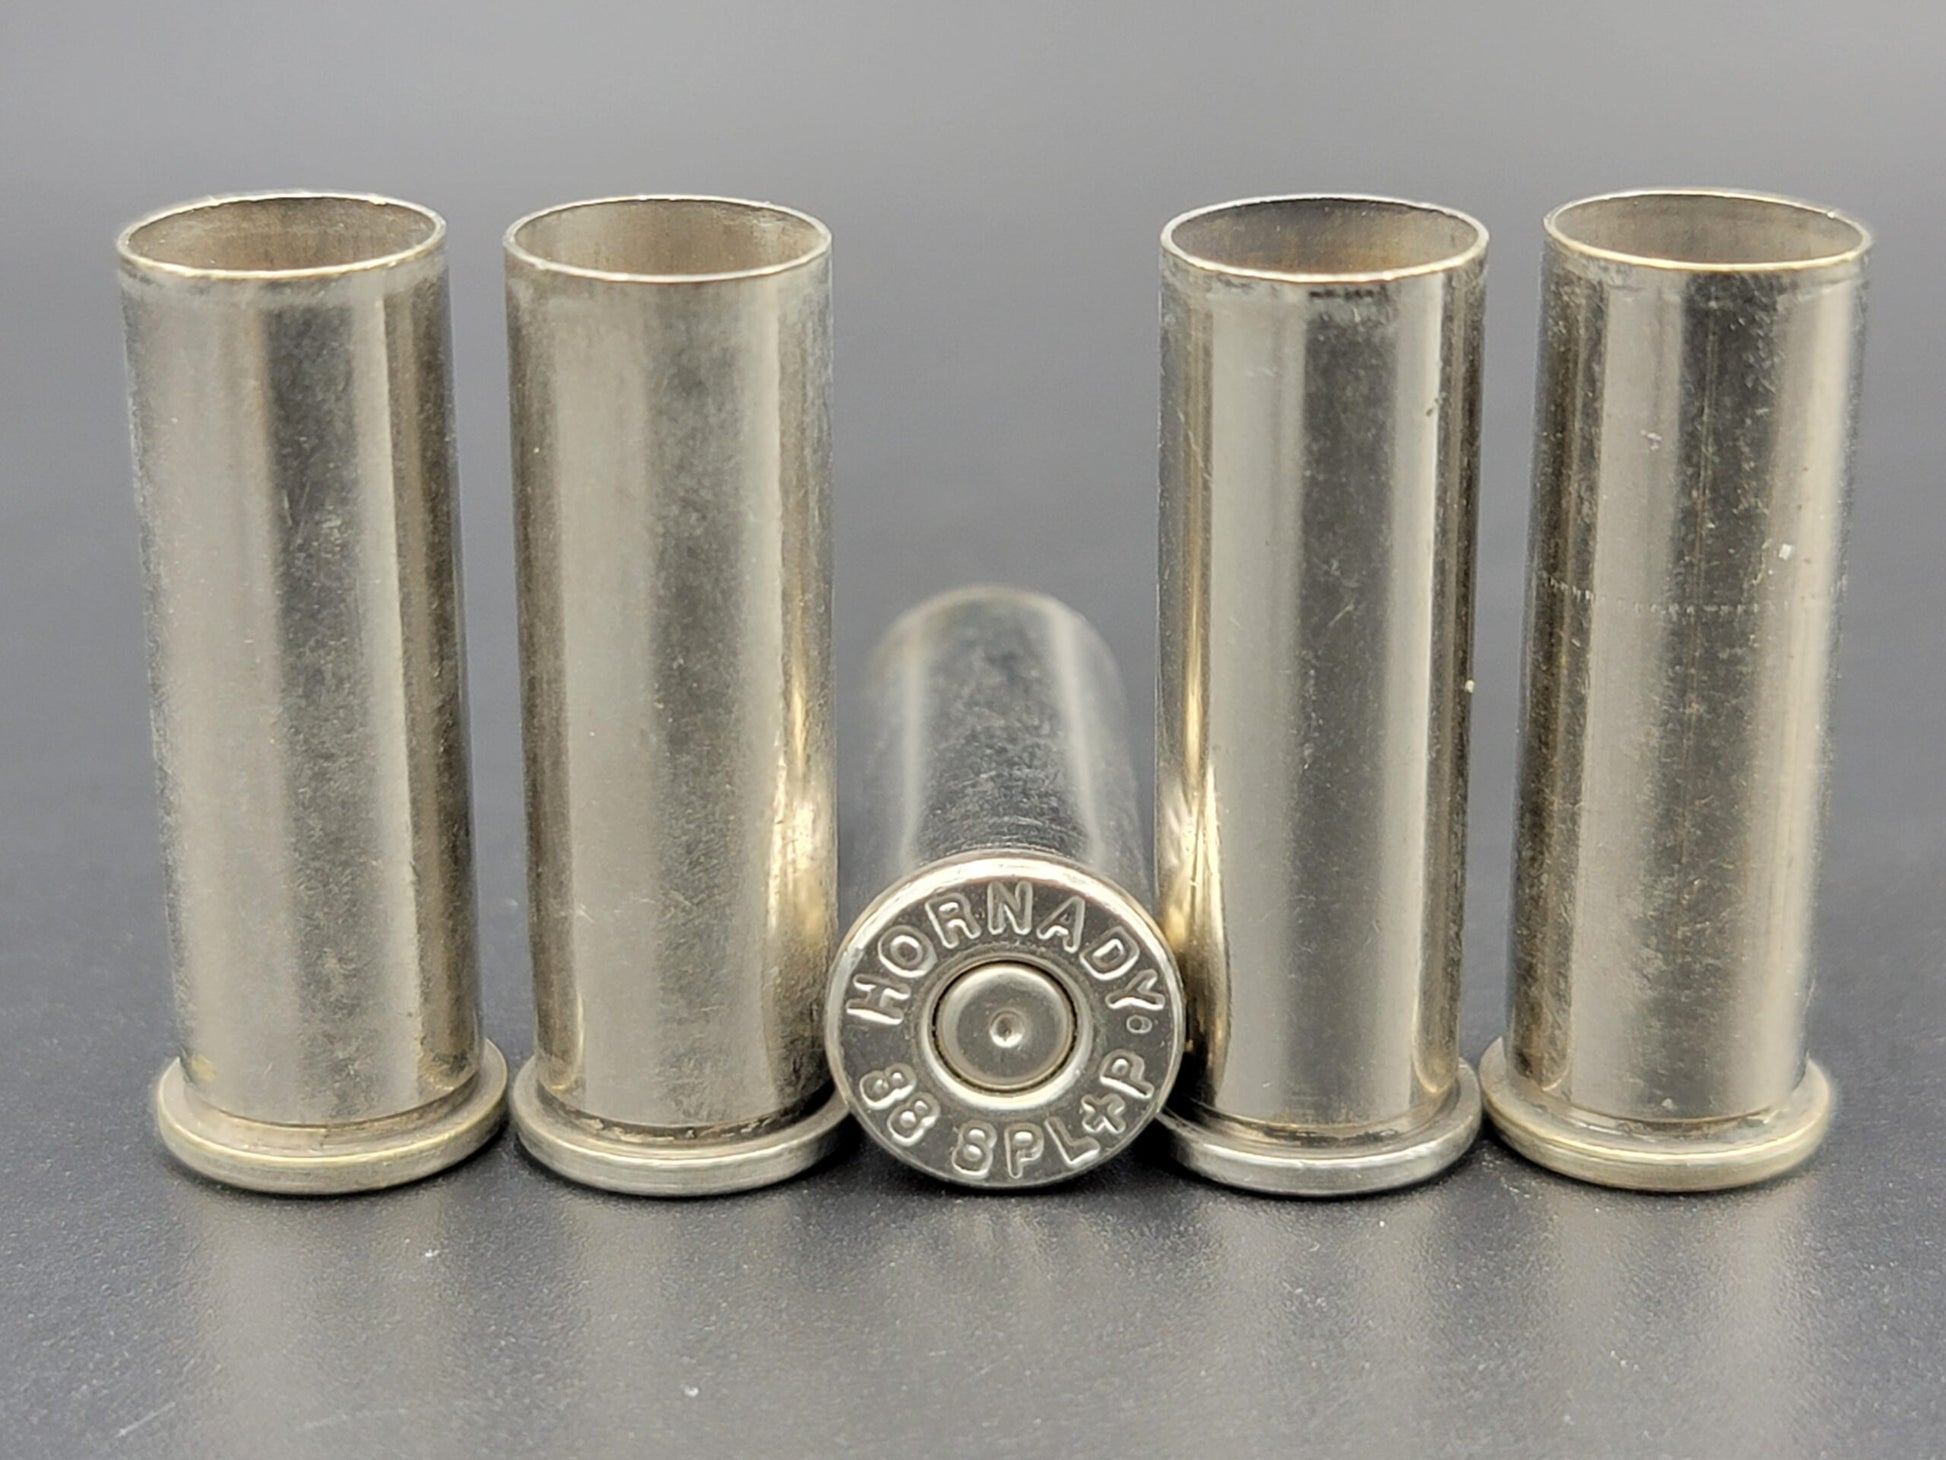 38 Special once fired pistol nickel. Hand sorted from reputable indoor/military ranges for reloading. Reliable spent casings for precision shooting.